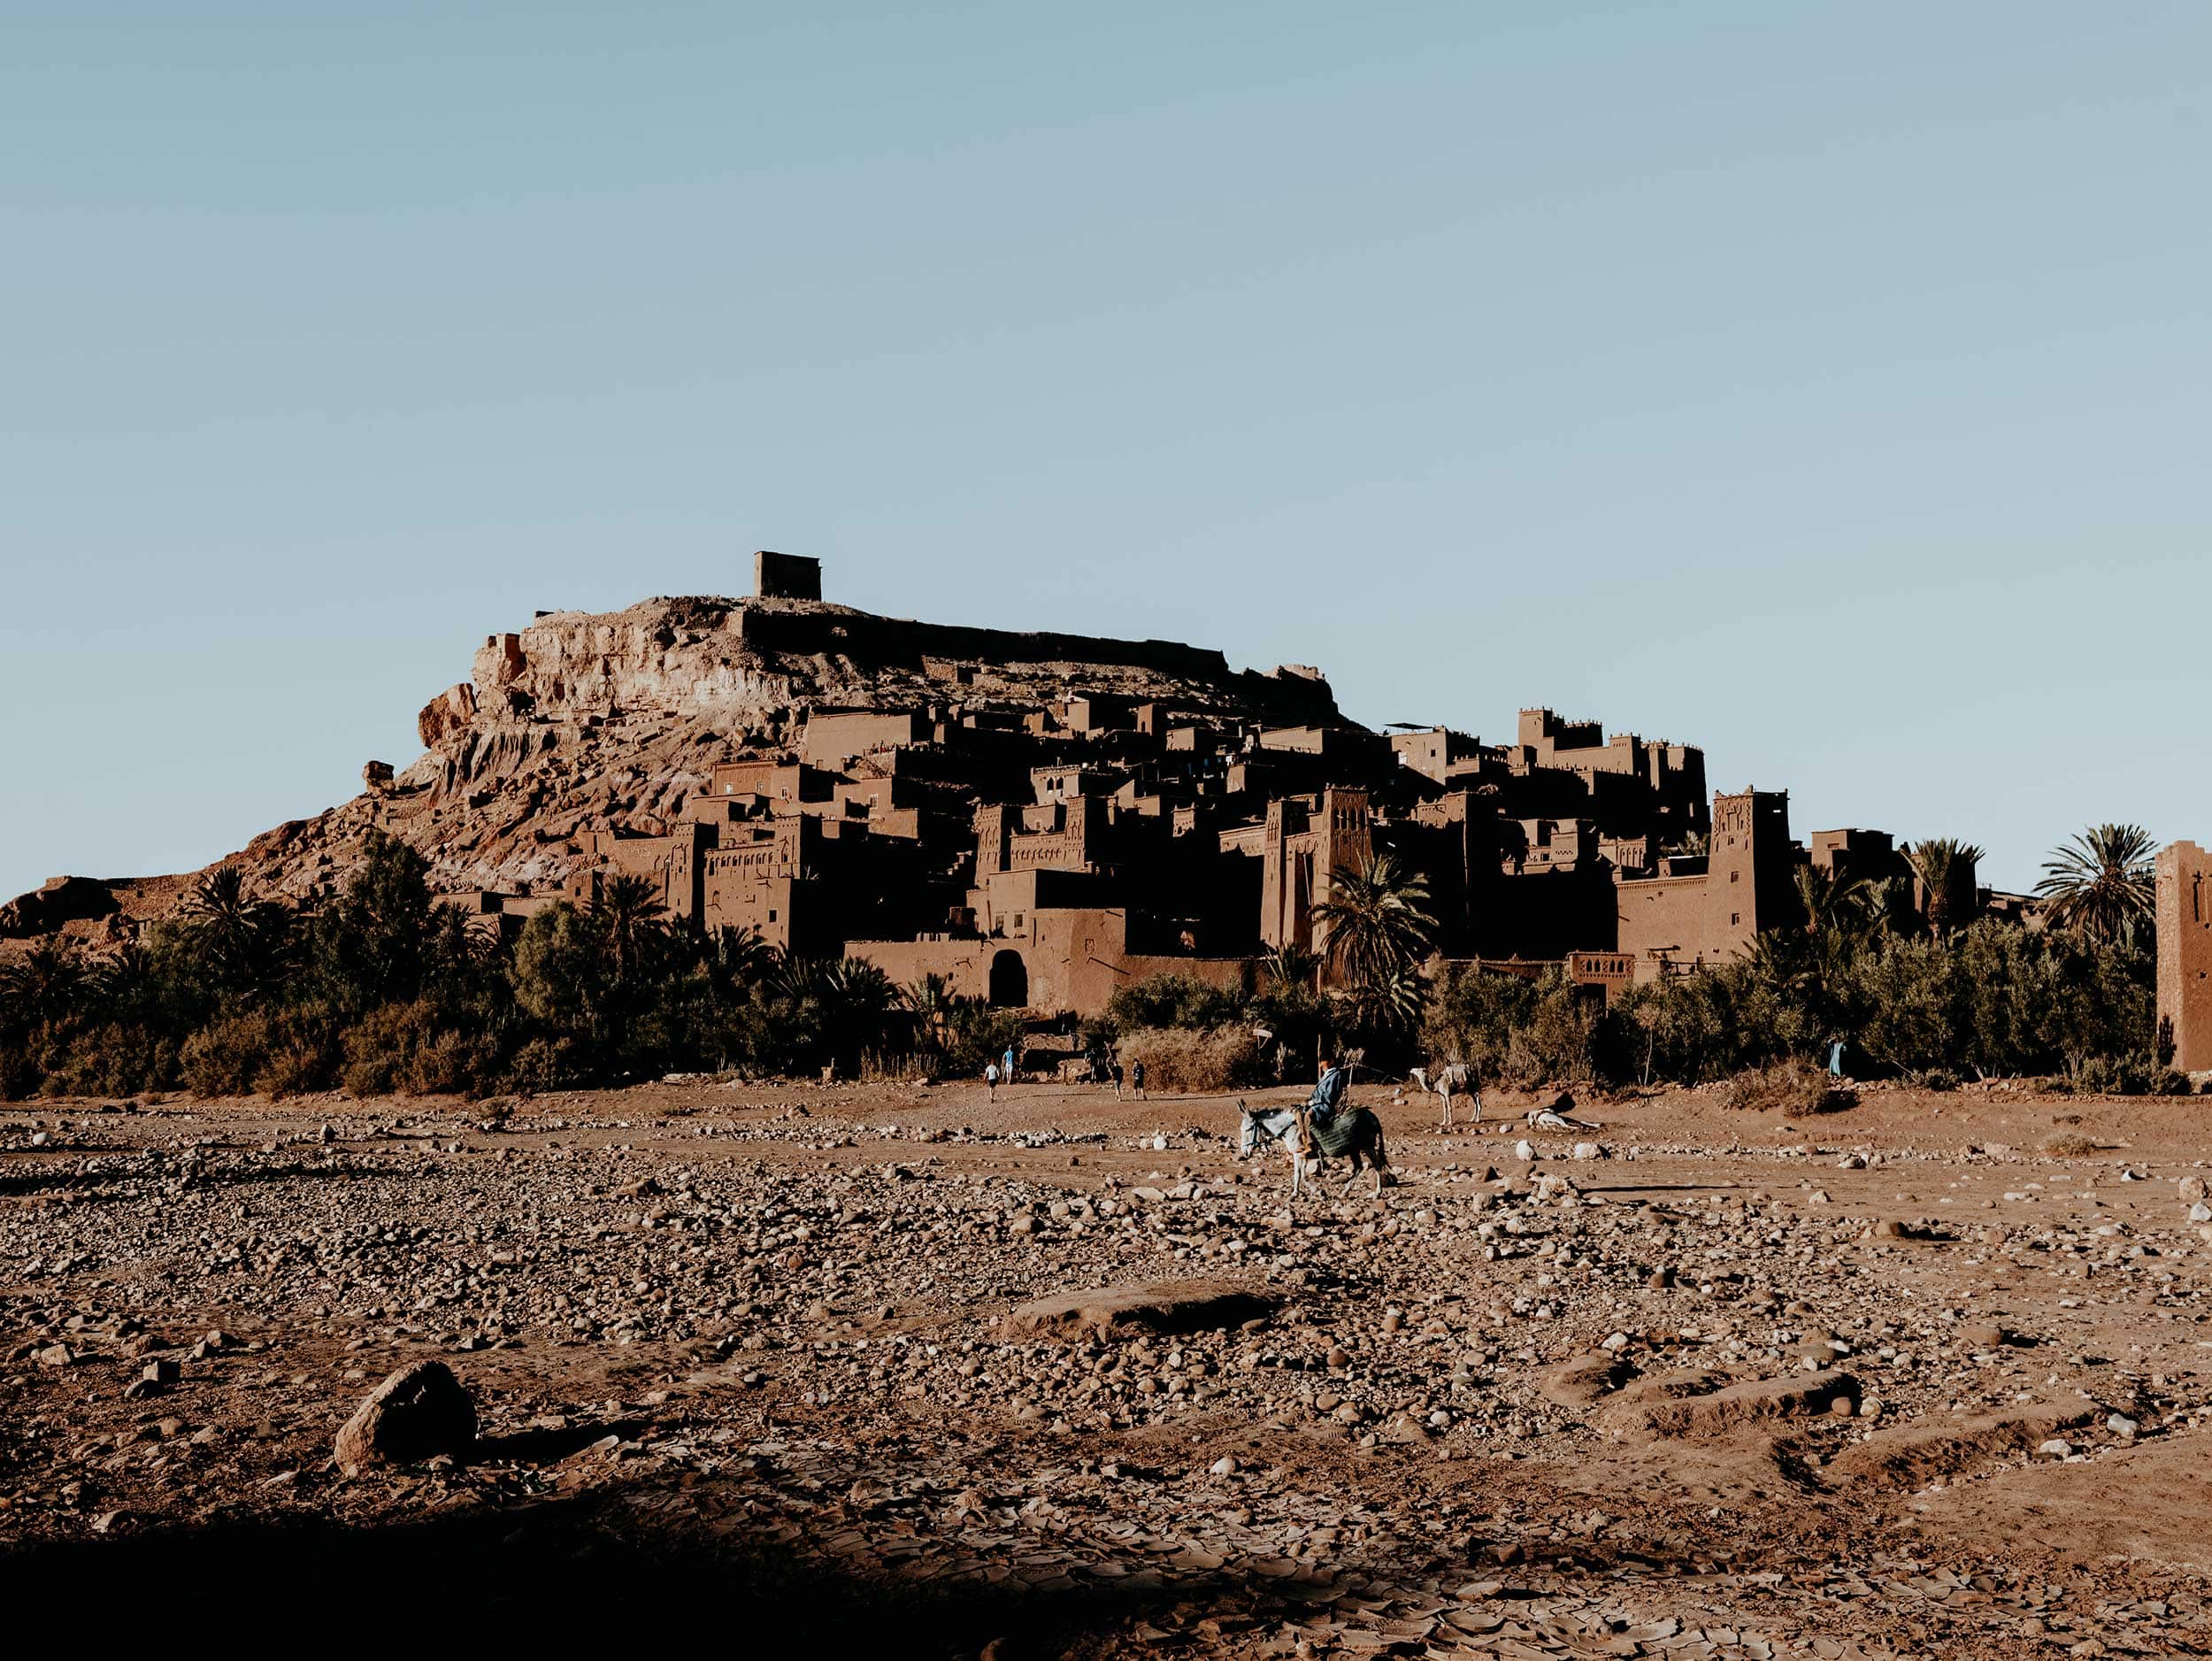 A guide to ait ben haddou in morocco